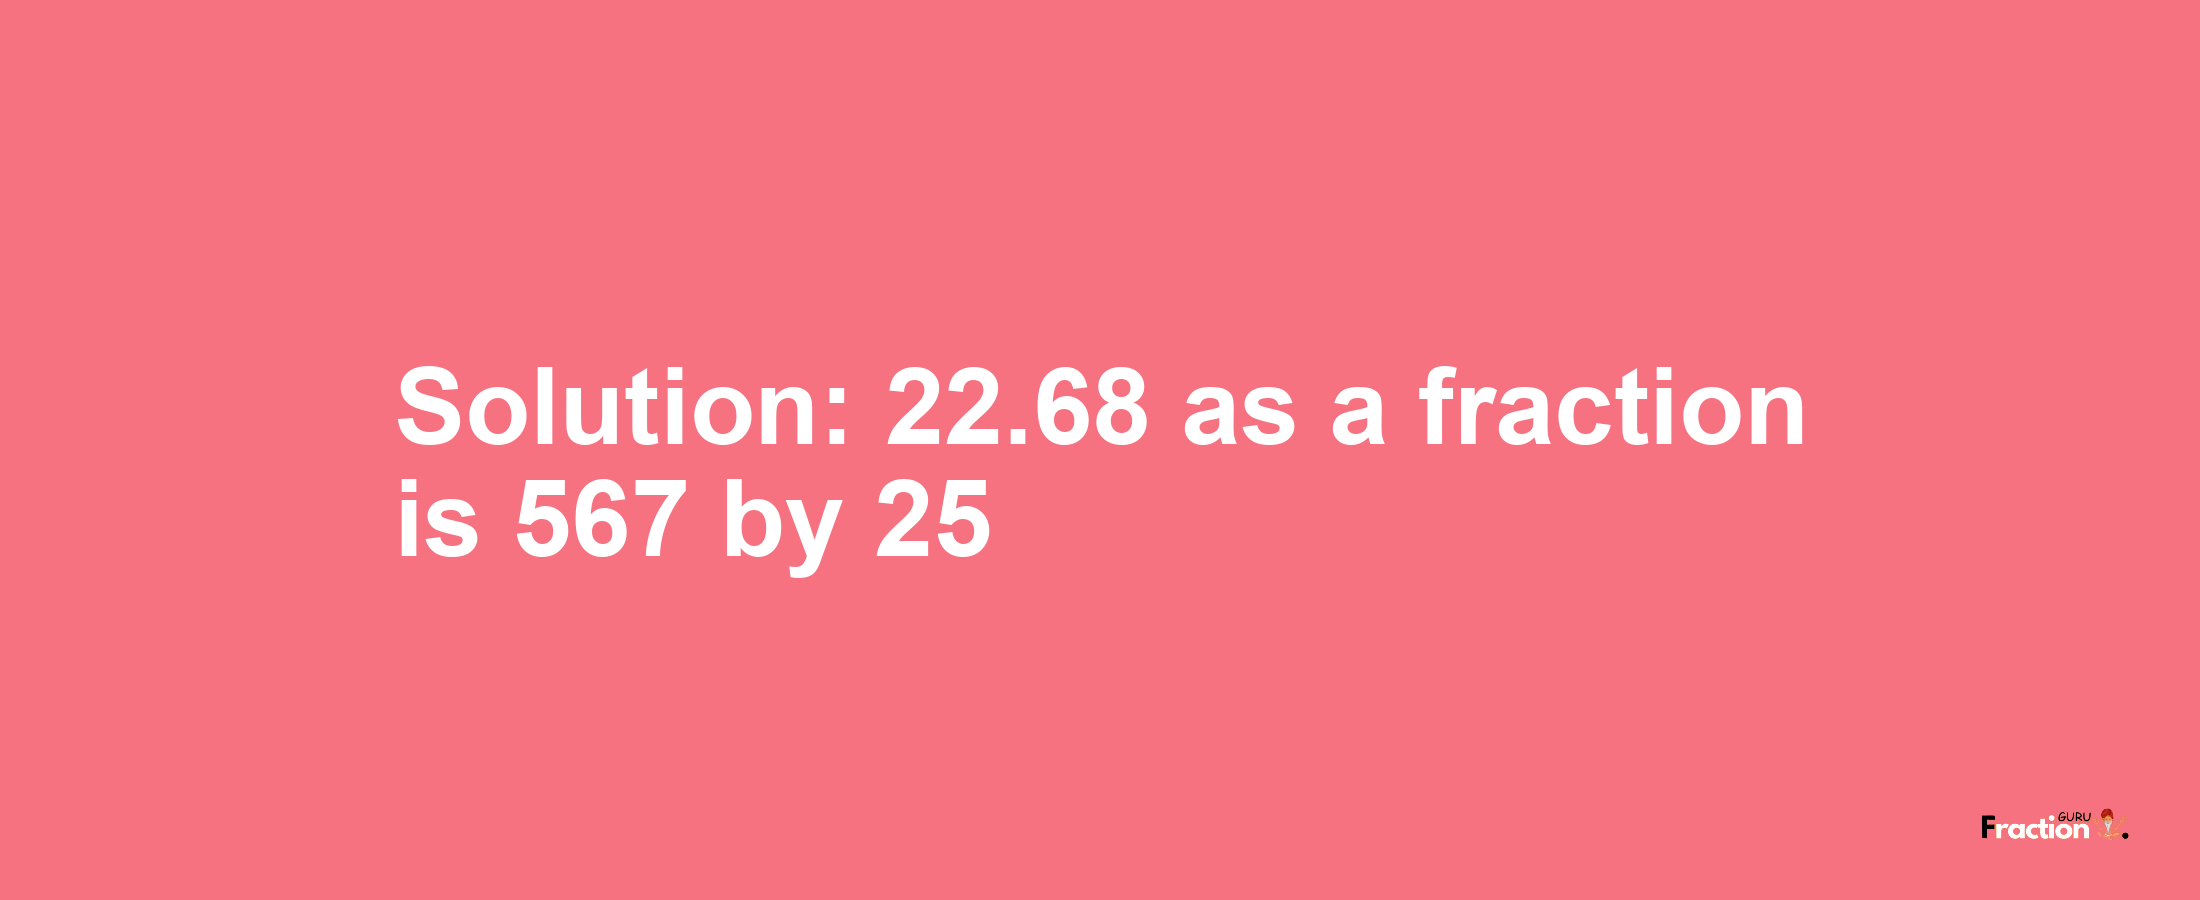 Solution:22.68 as a fraction is 567/25